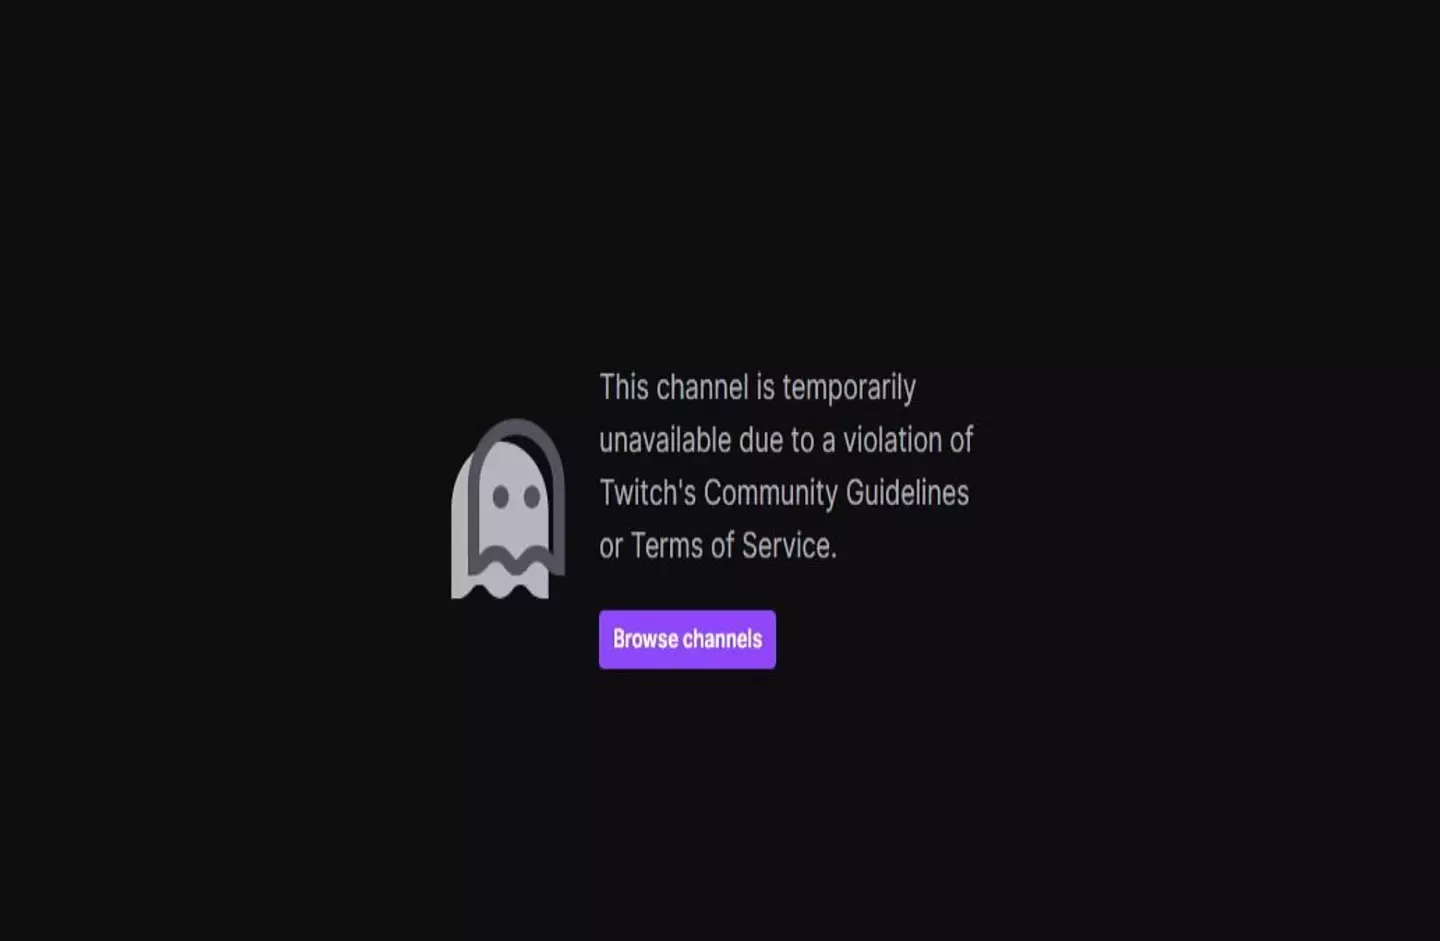 ai_peter has been suspended from Twitch.